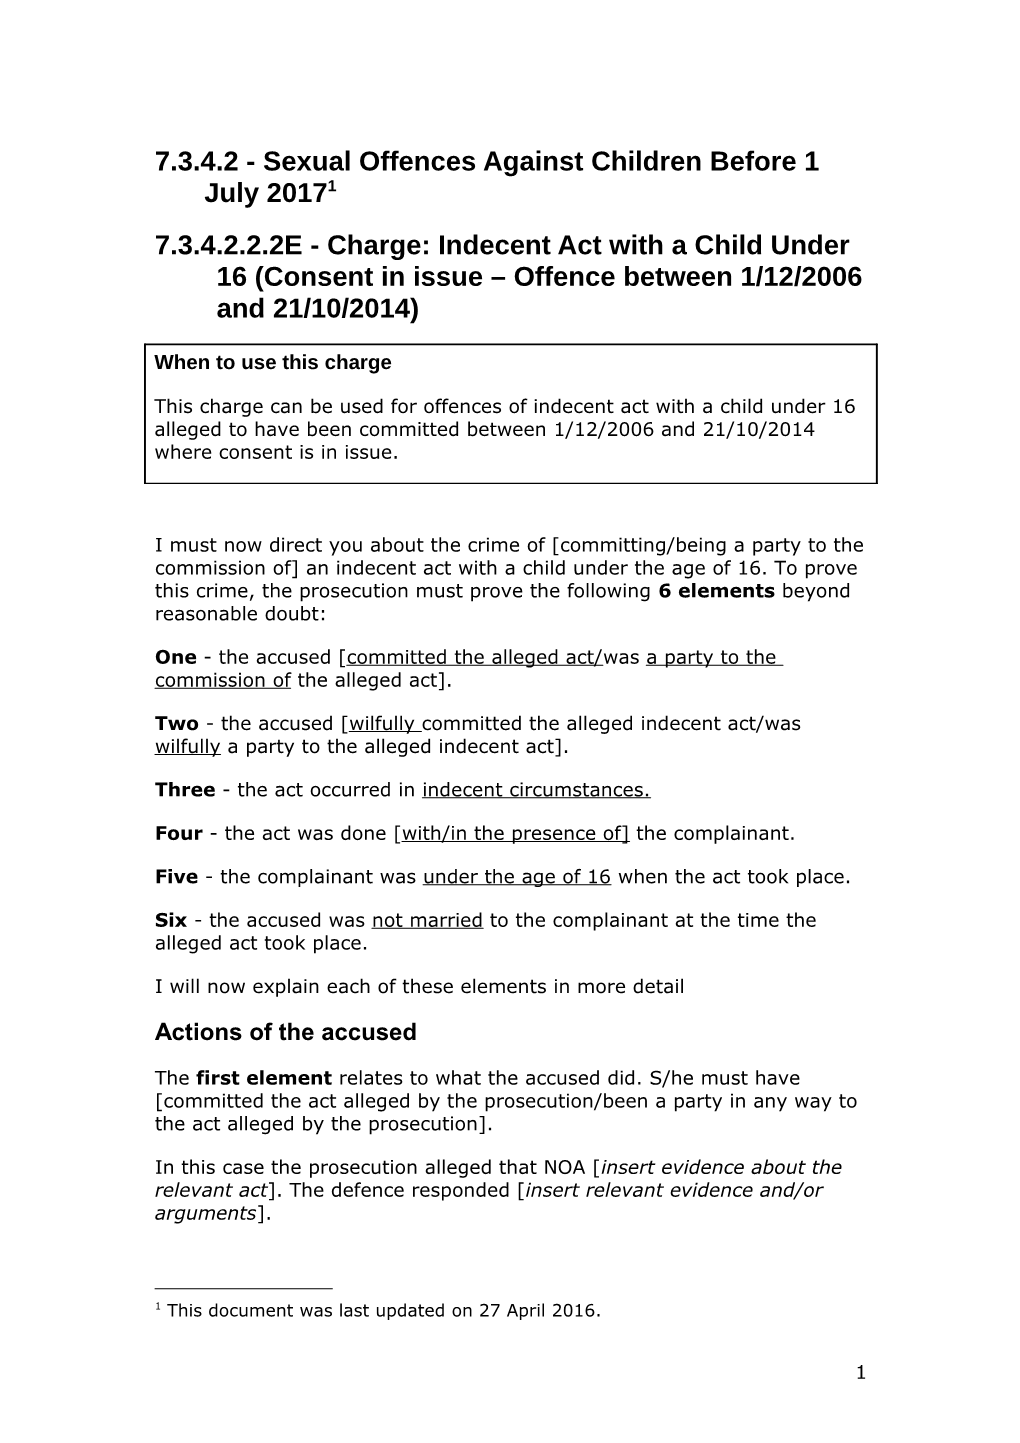 7.3.4.2.2.2E- Charge: Indecent Act with a Child Under 16 (Consent in Issue Offence Between